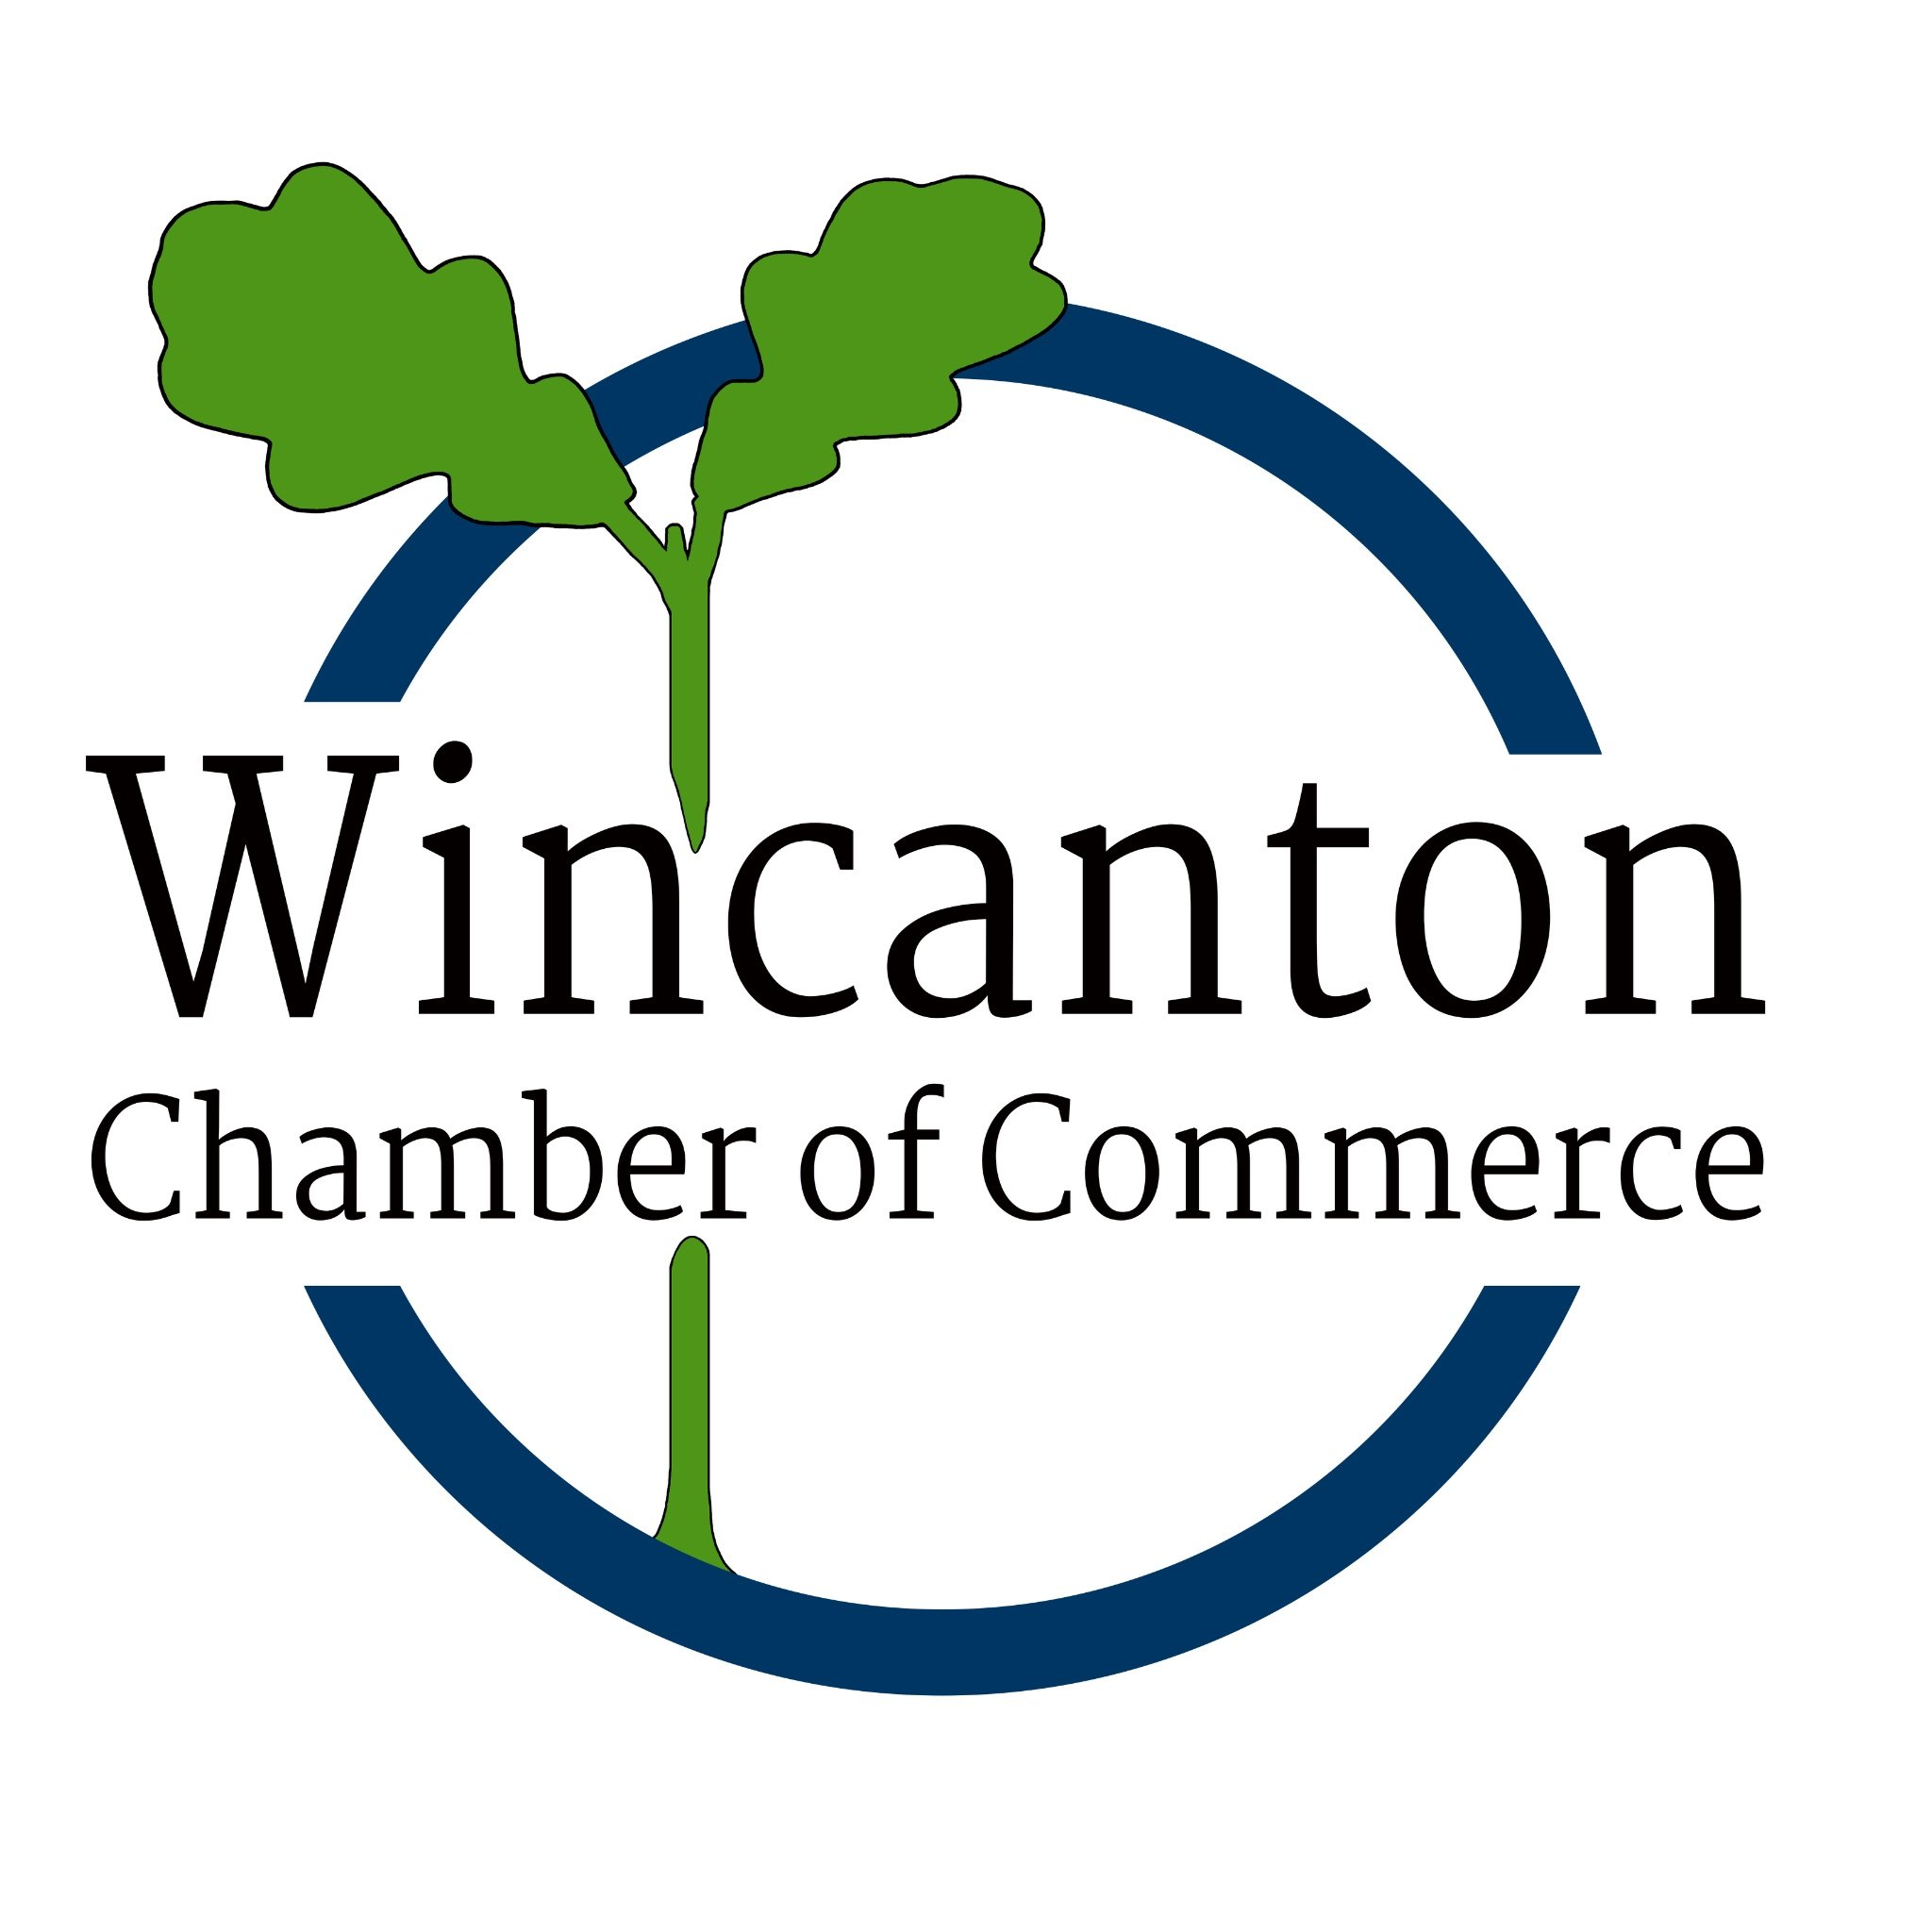 Wincanton Chamber of Commerce. To support new and existing businesses in Wincanton and the surrounding area.